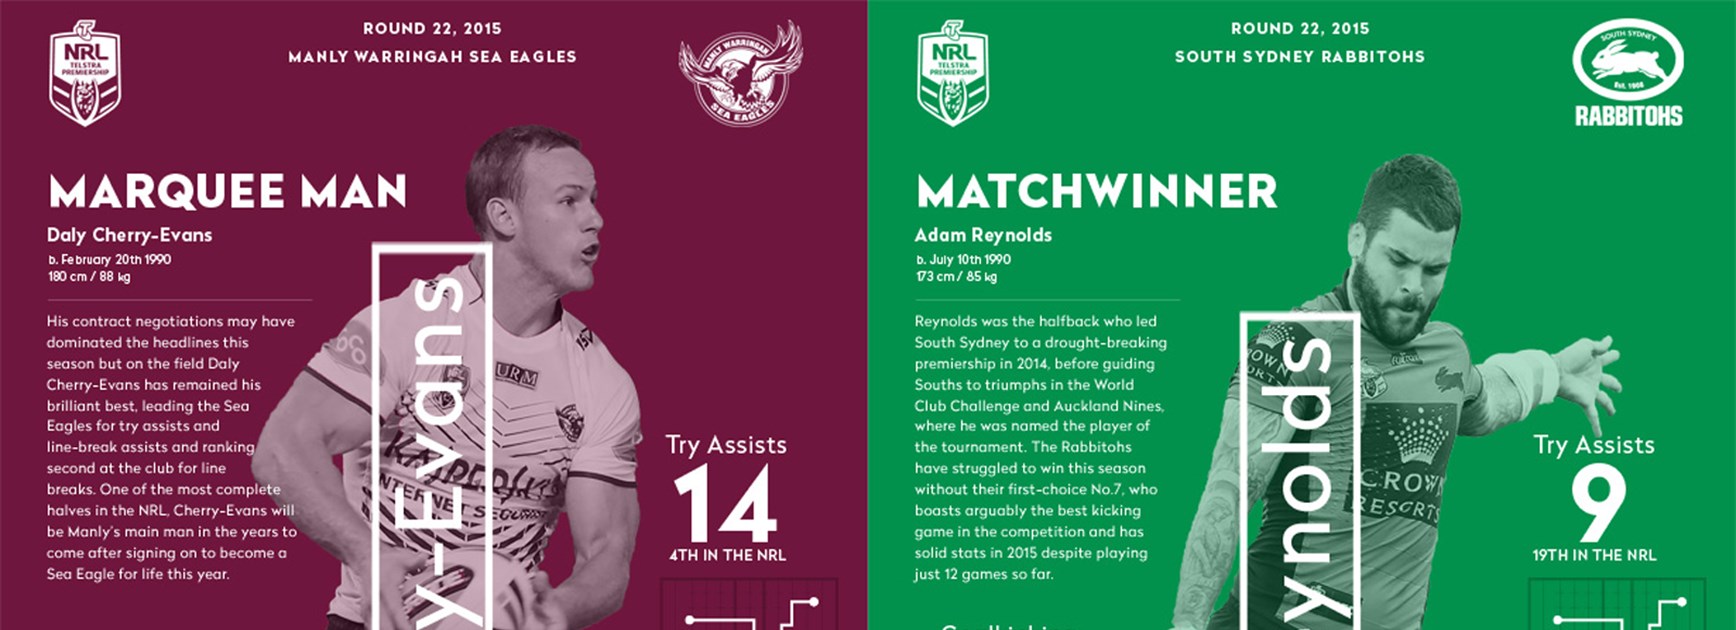 Friday night's Manly v South Sydney blockbuster features a match-up of two of the best halfbacks in the NRL.